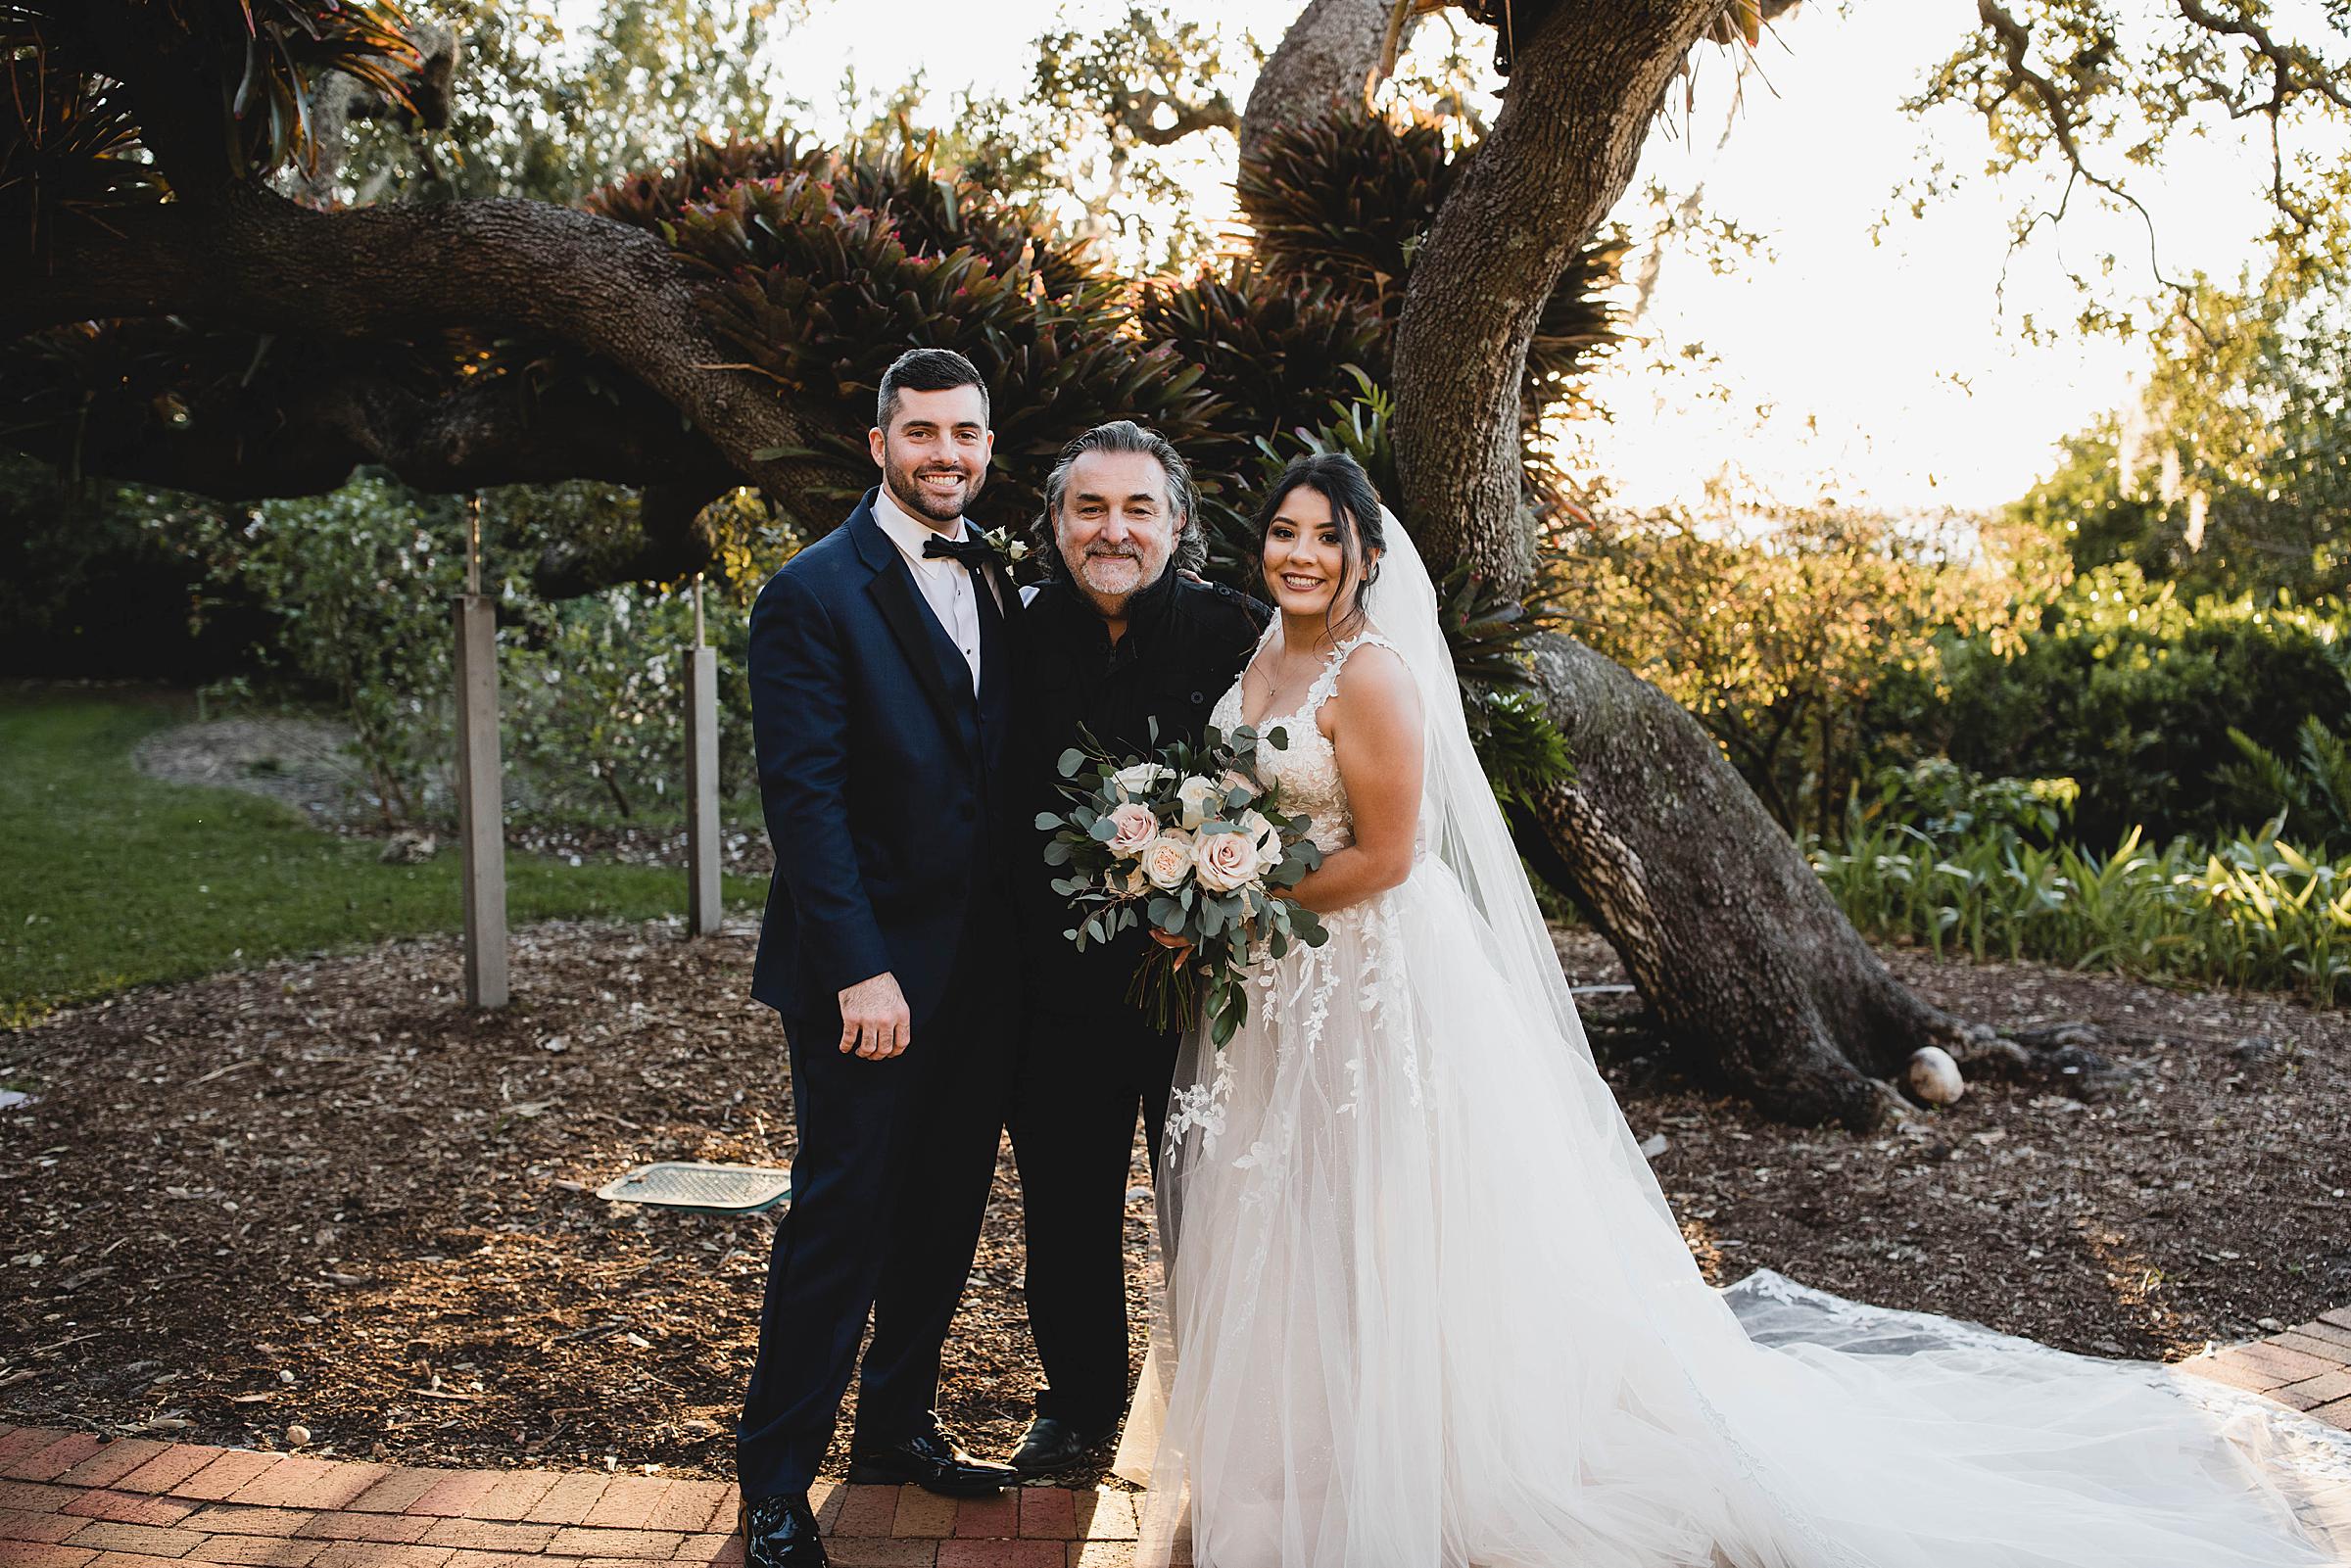 bride and groom portrait with Phil Mancini at Selby Gardens wedding, Photographed by Juliana Montane Photography